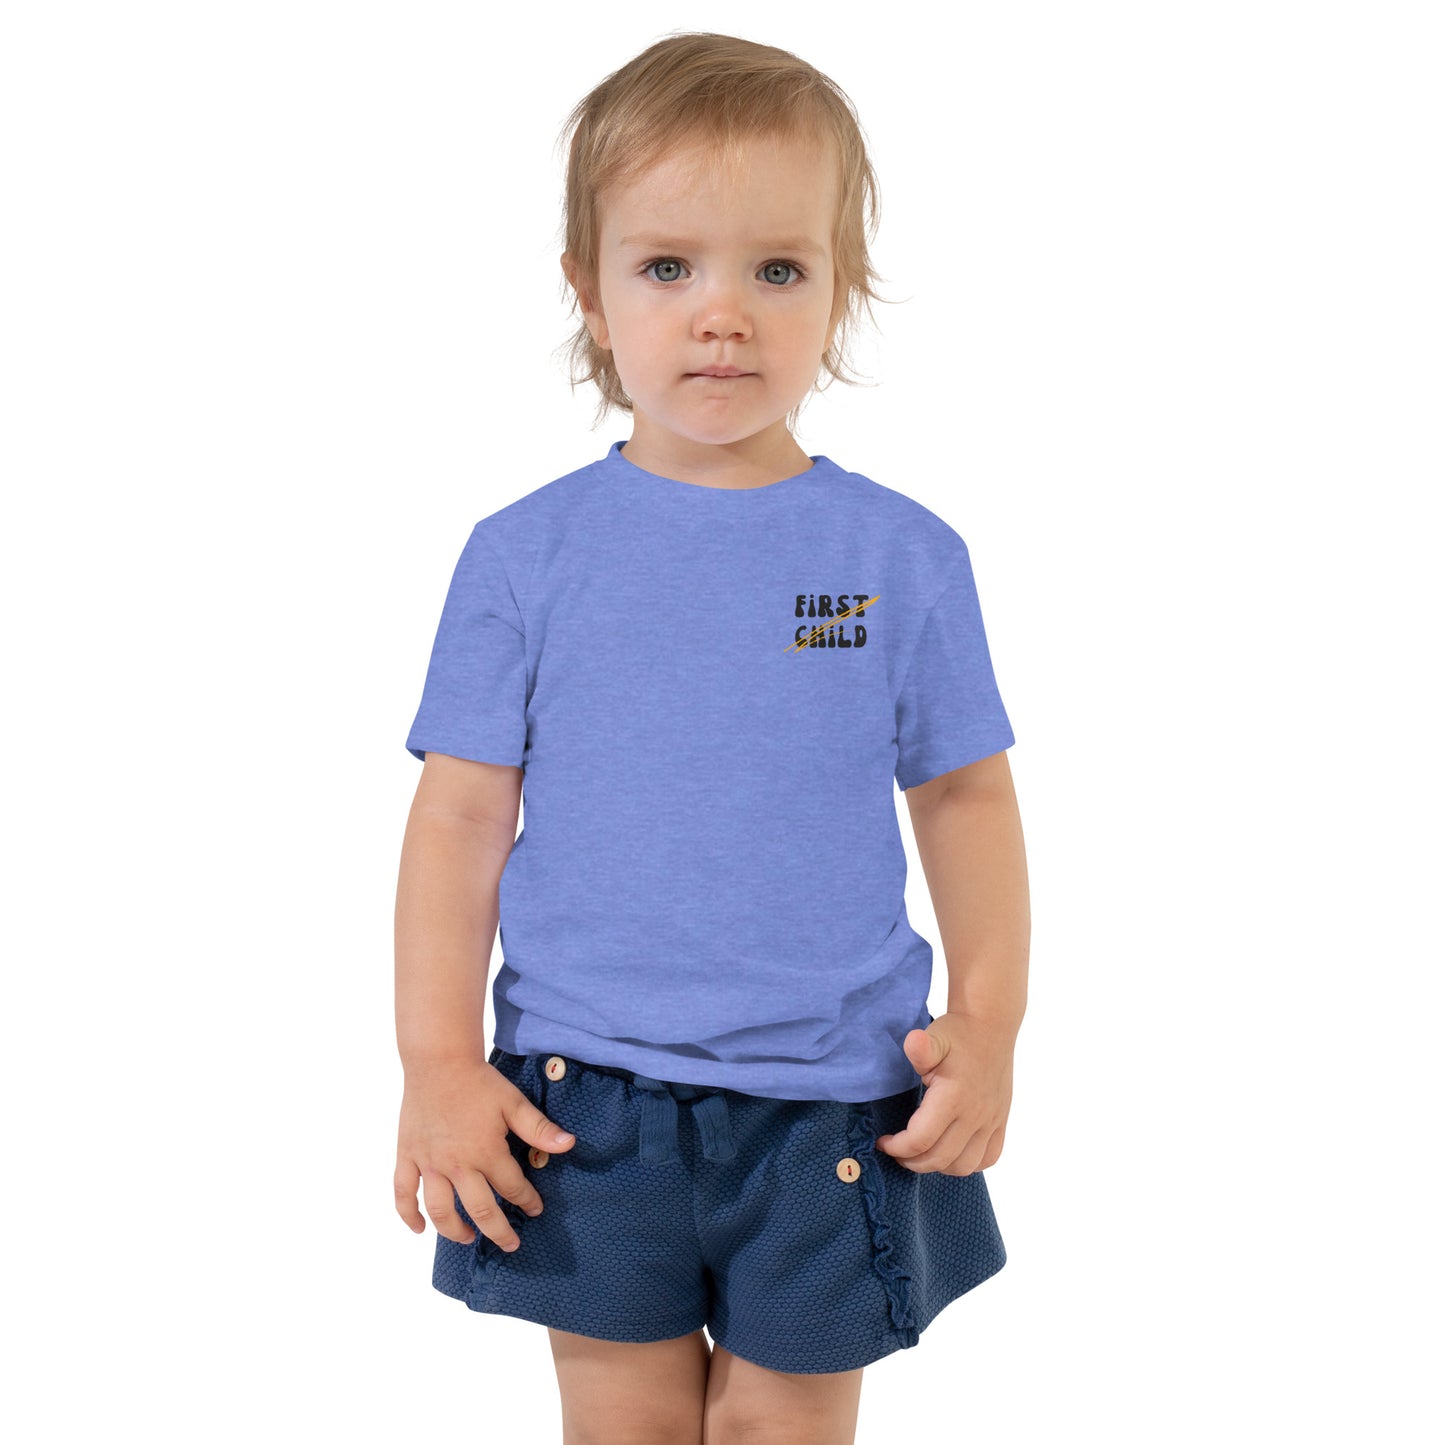 First child toddler tee